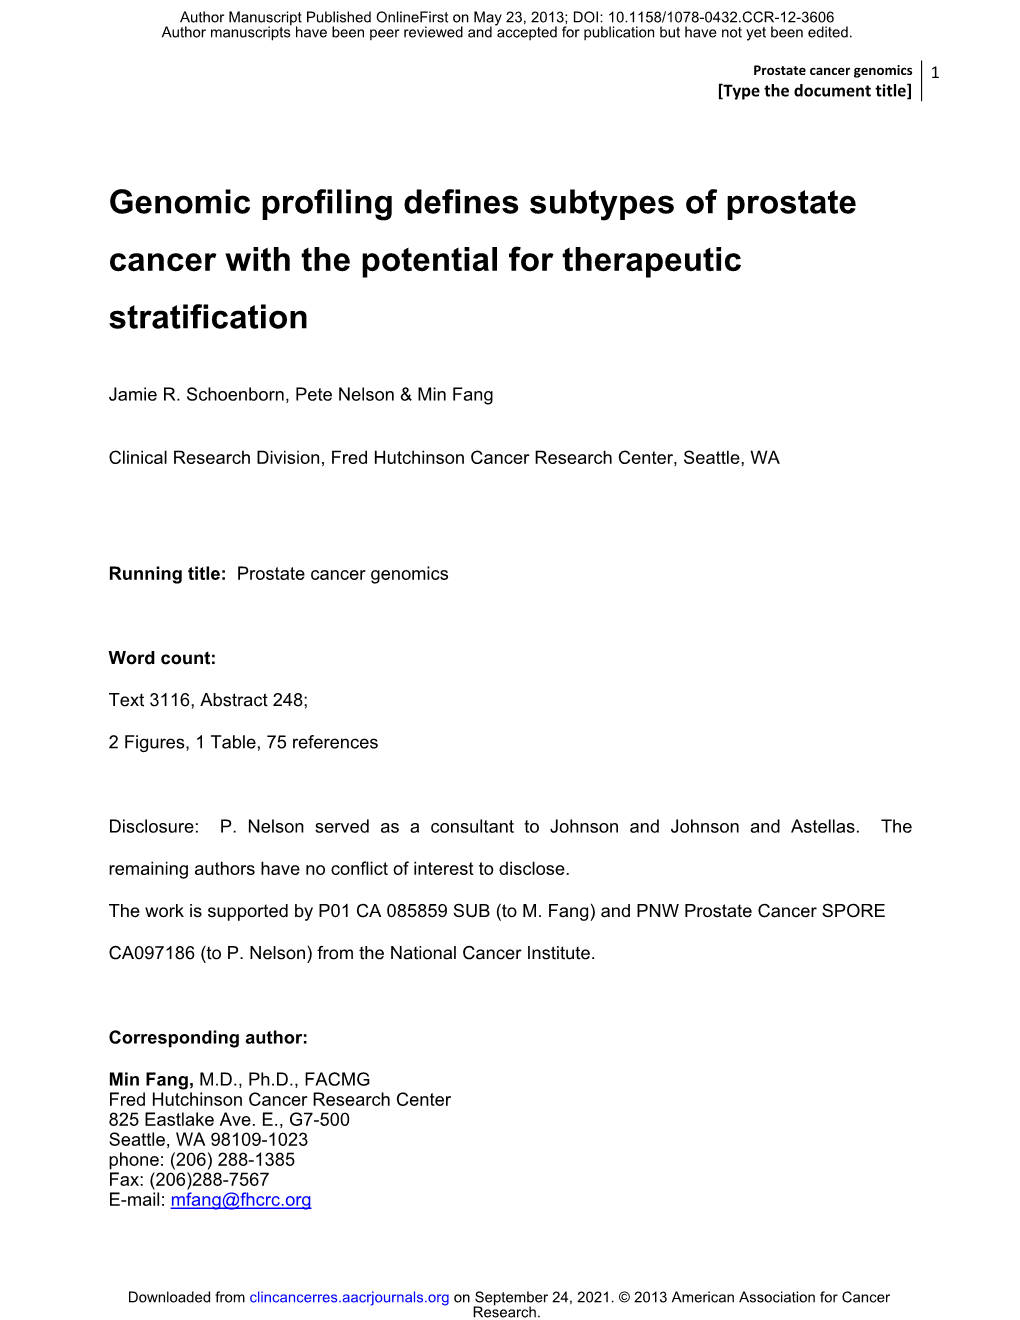 Genomic Profiling Defines Subtypes of Prostate Cancer with the Potential for Therapeutic Stratification